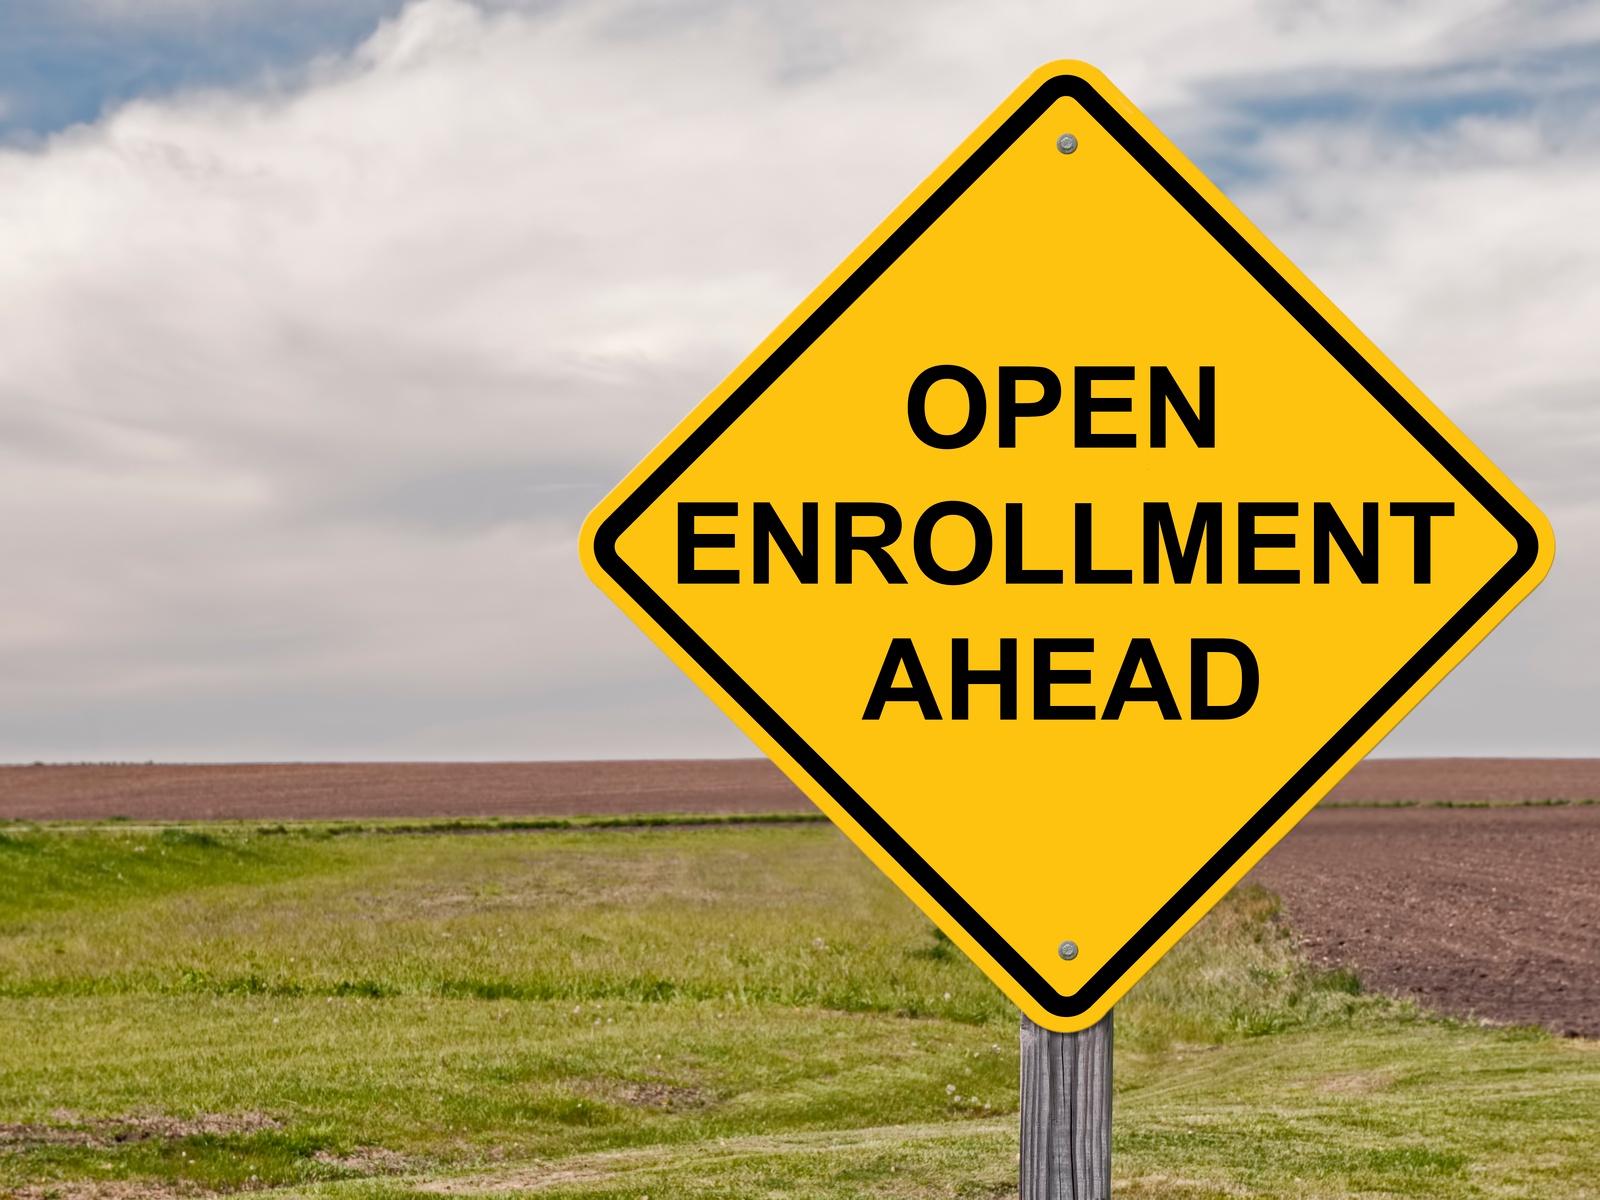 4 Ways to Spice Up Employee Benefits Open Enrollment Meetings - Featured Image